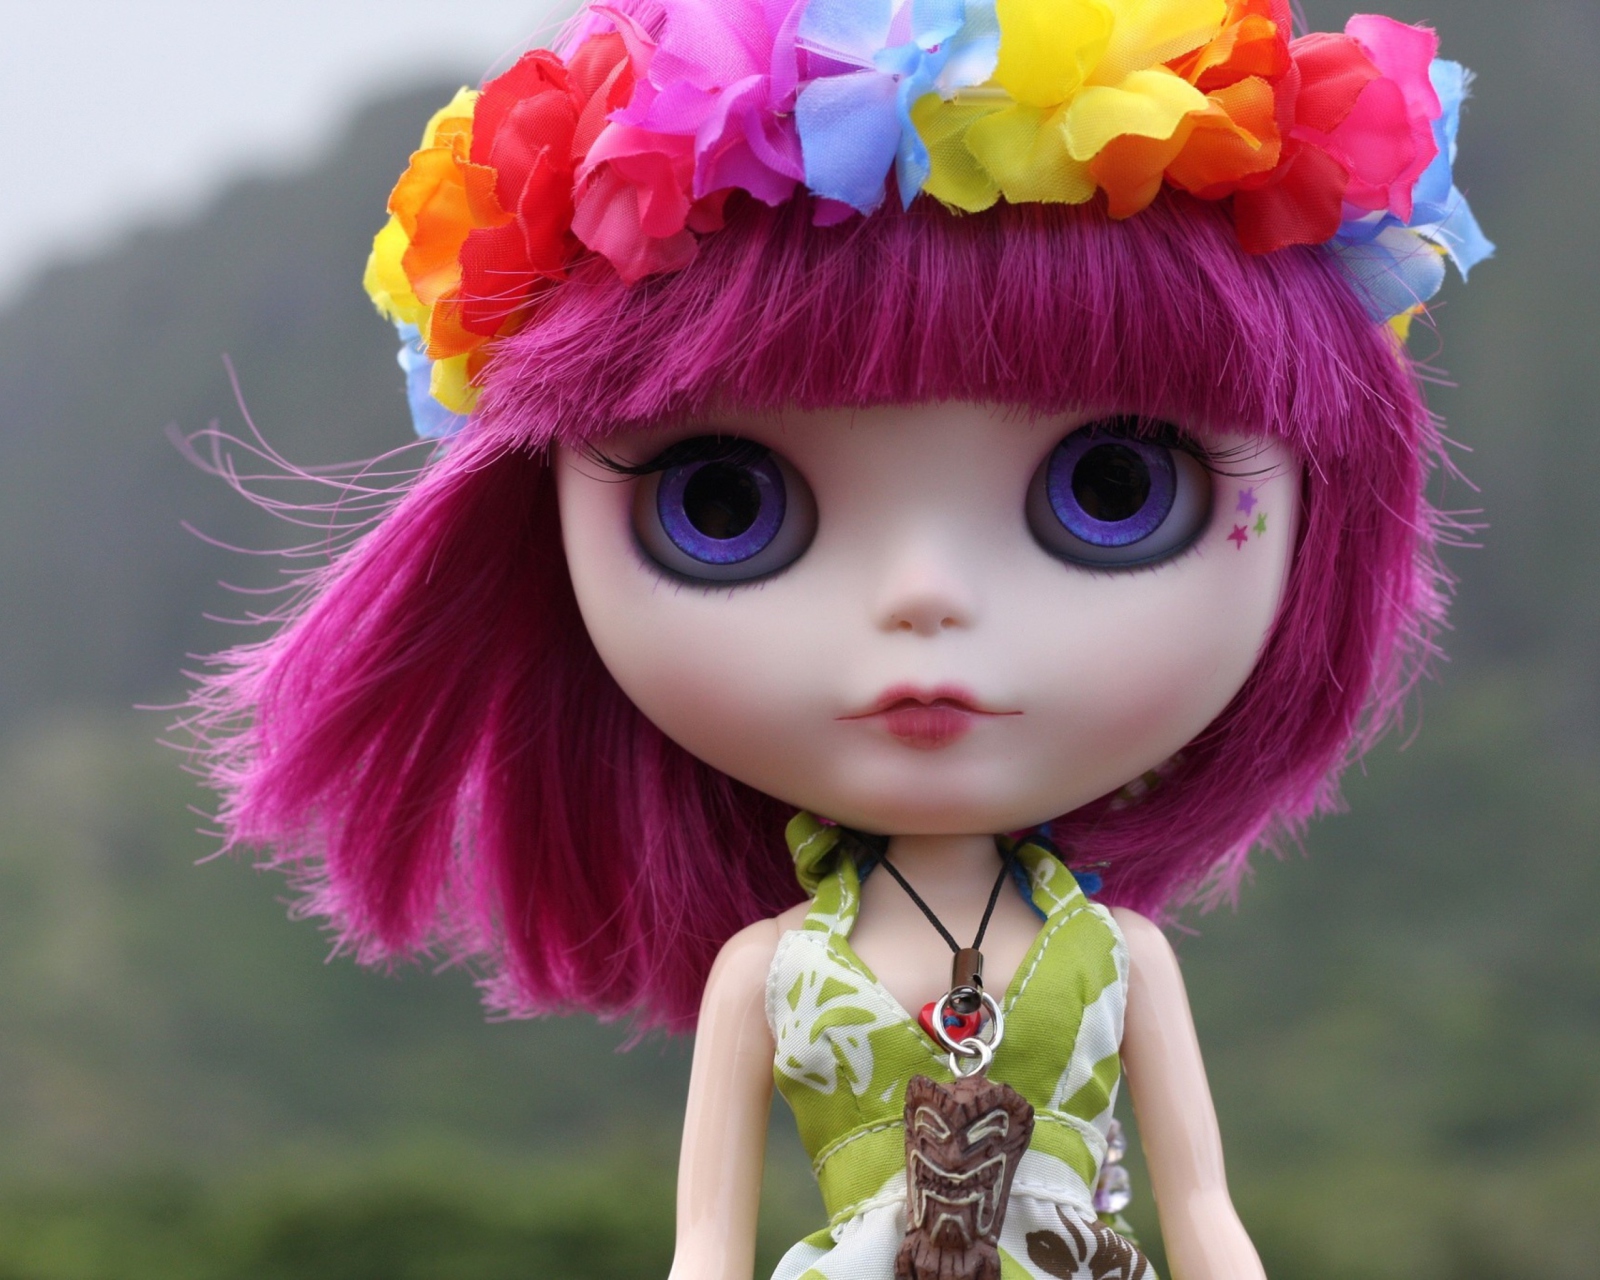 Doll With Pink Hair And Blue Eyes wallpaper 1600x1280